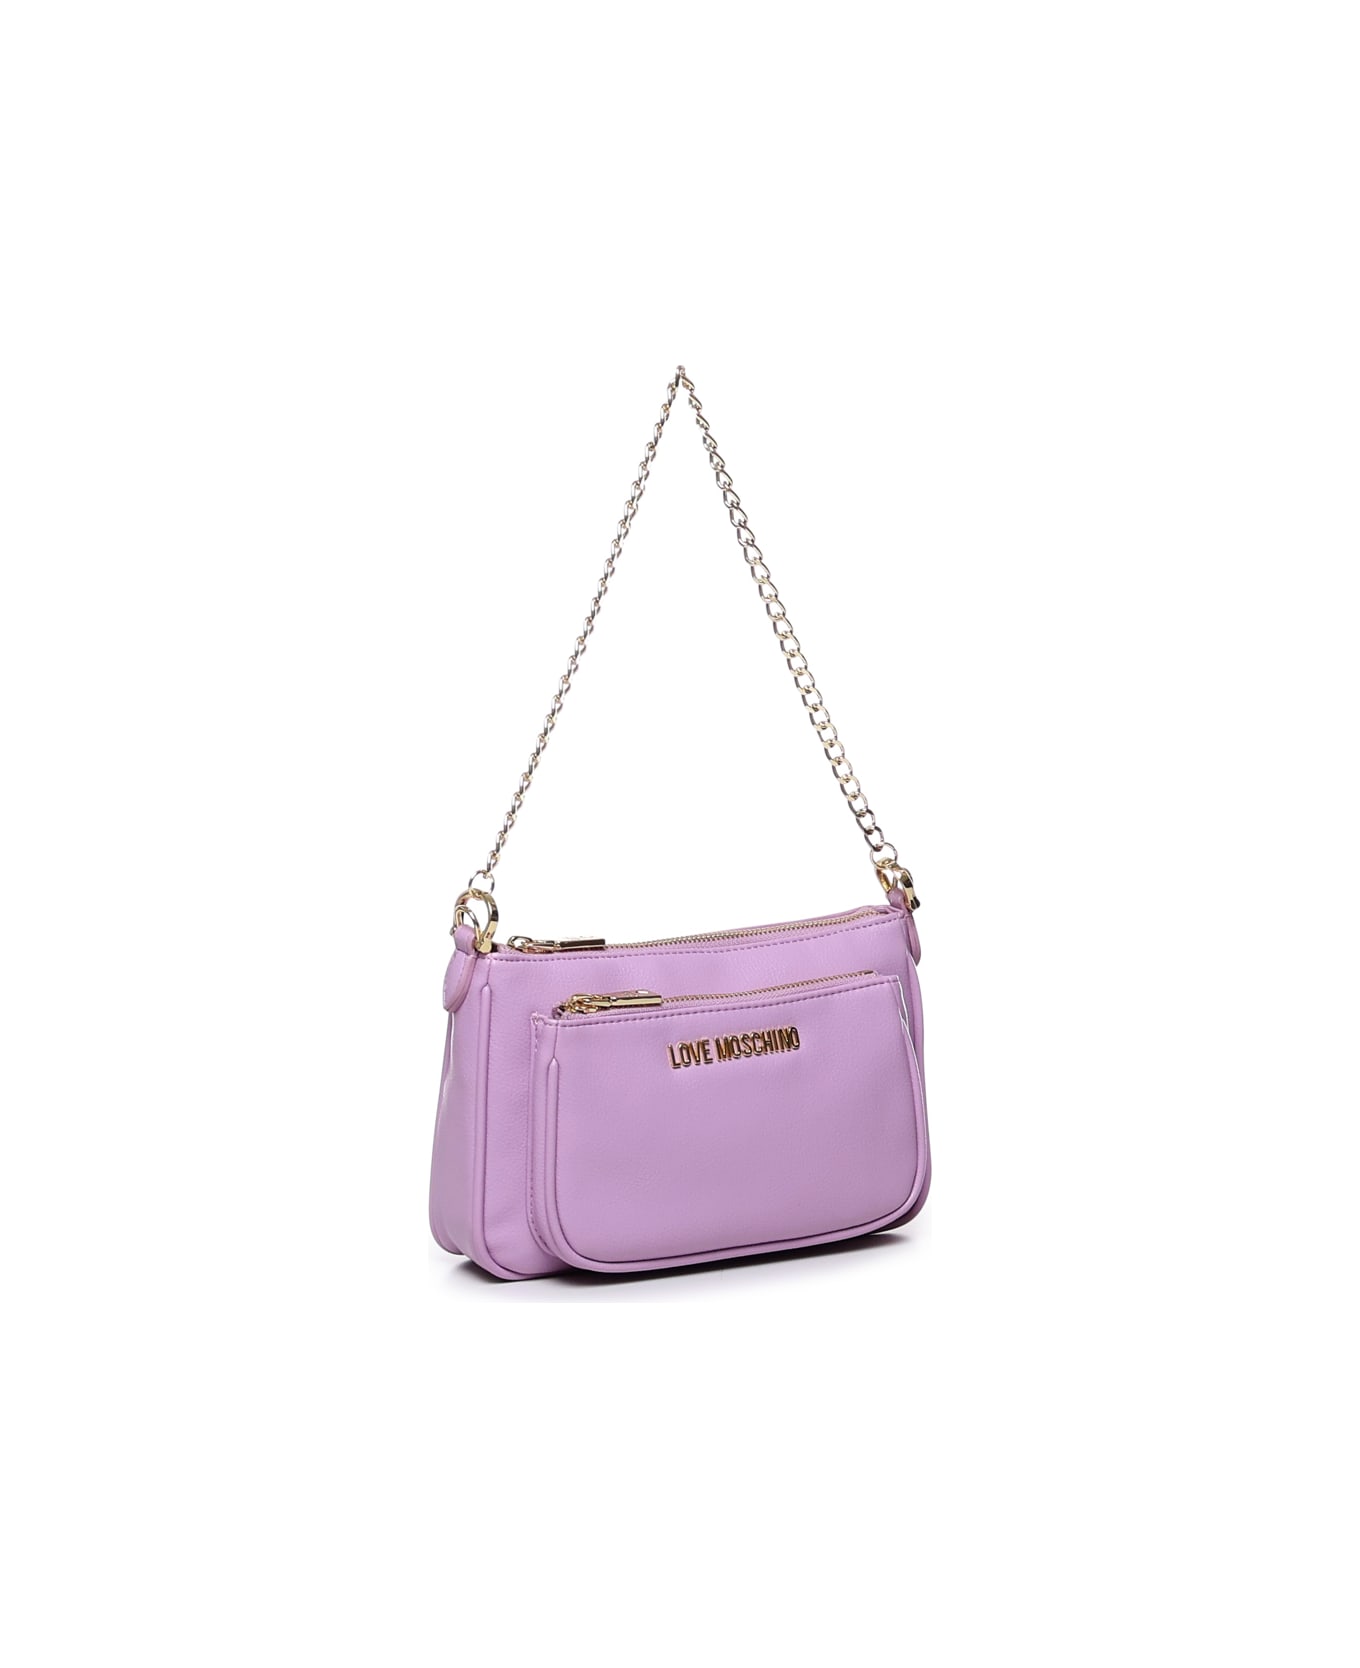 Love Moschino Pouch Charm Shoulder Bag - Lillac